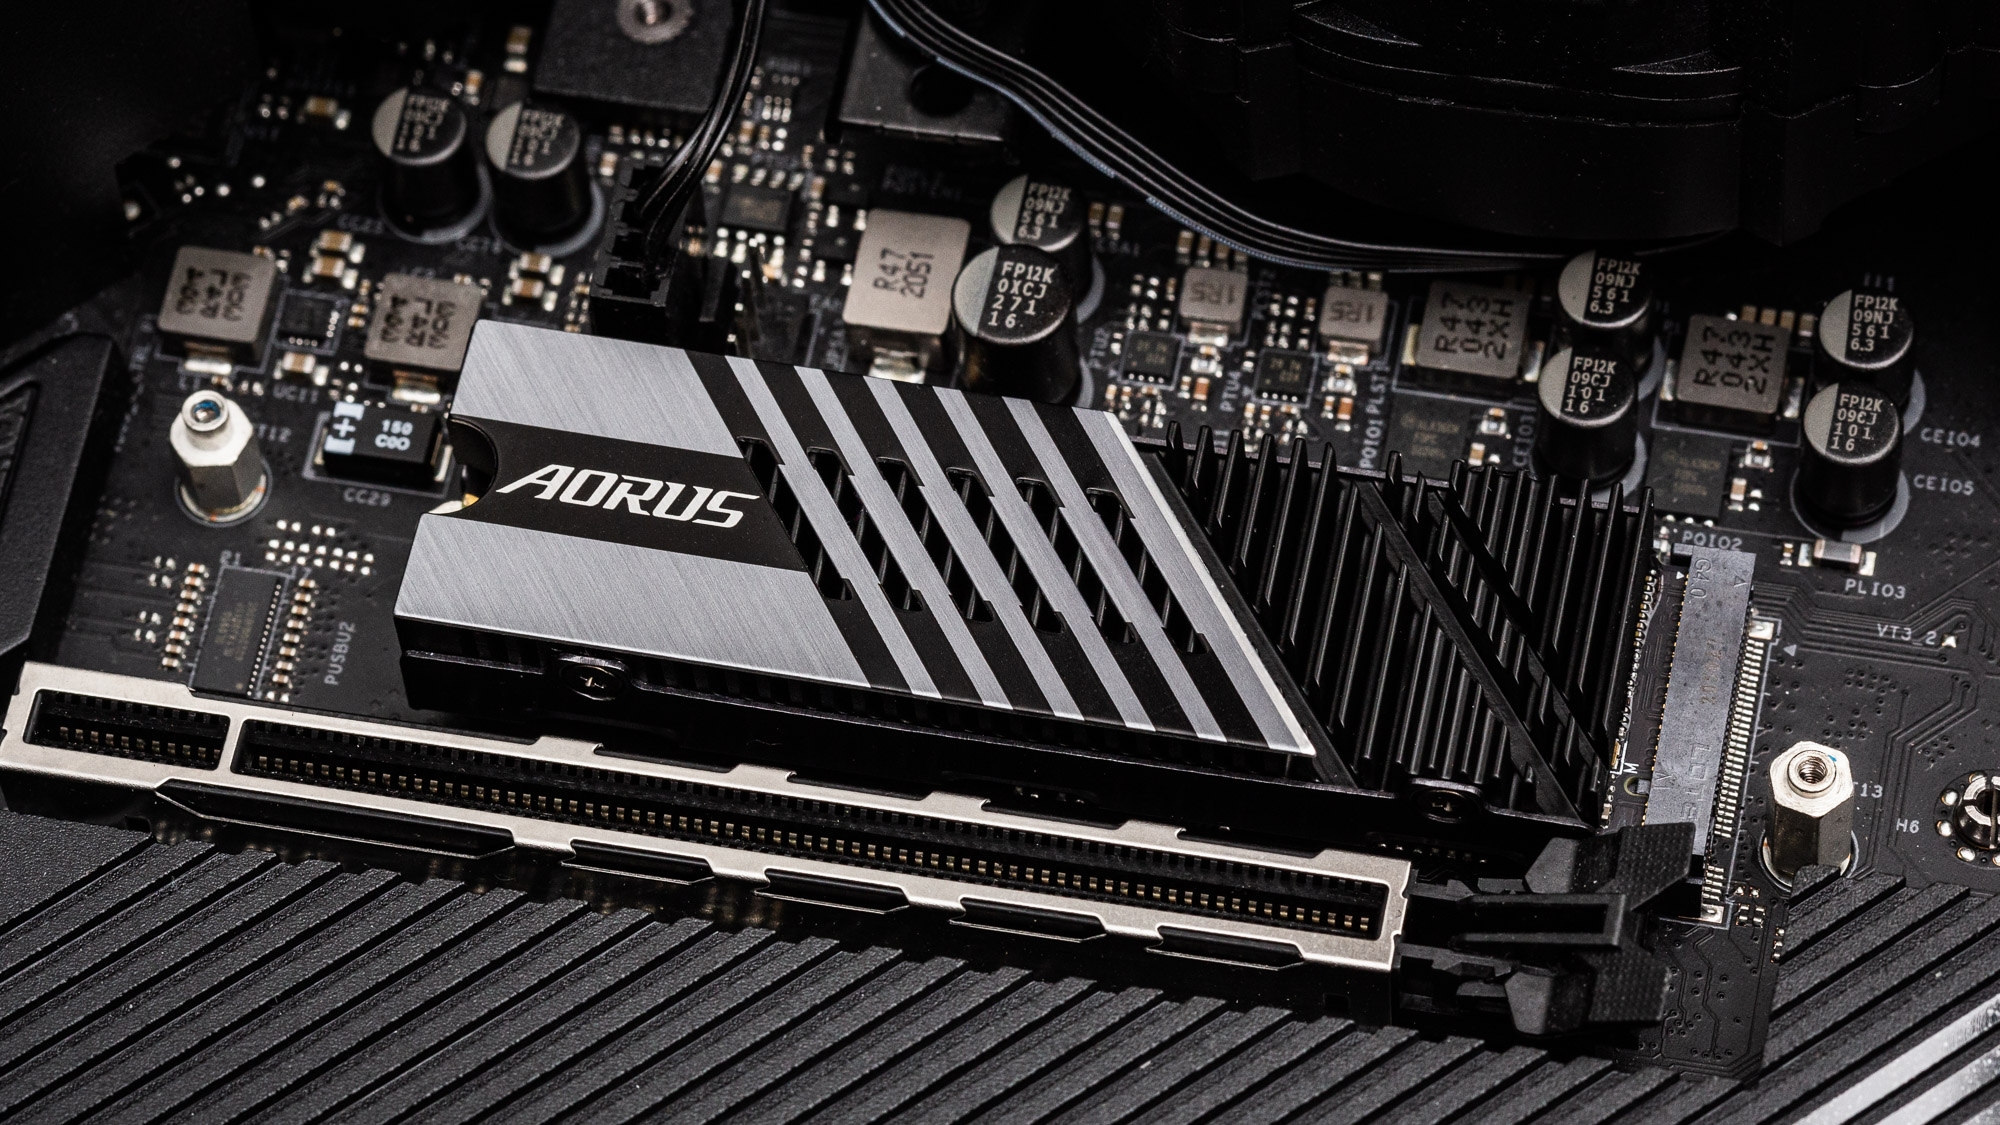 2TB Performance Results - Gigabyte Aorus Gen4 7000s M.2 NVMe SSD Review: Cooled for Speed | Tom's Hardware